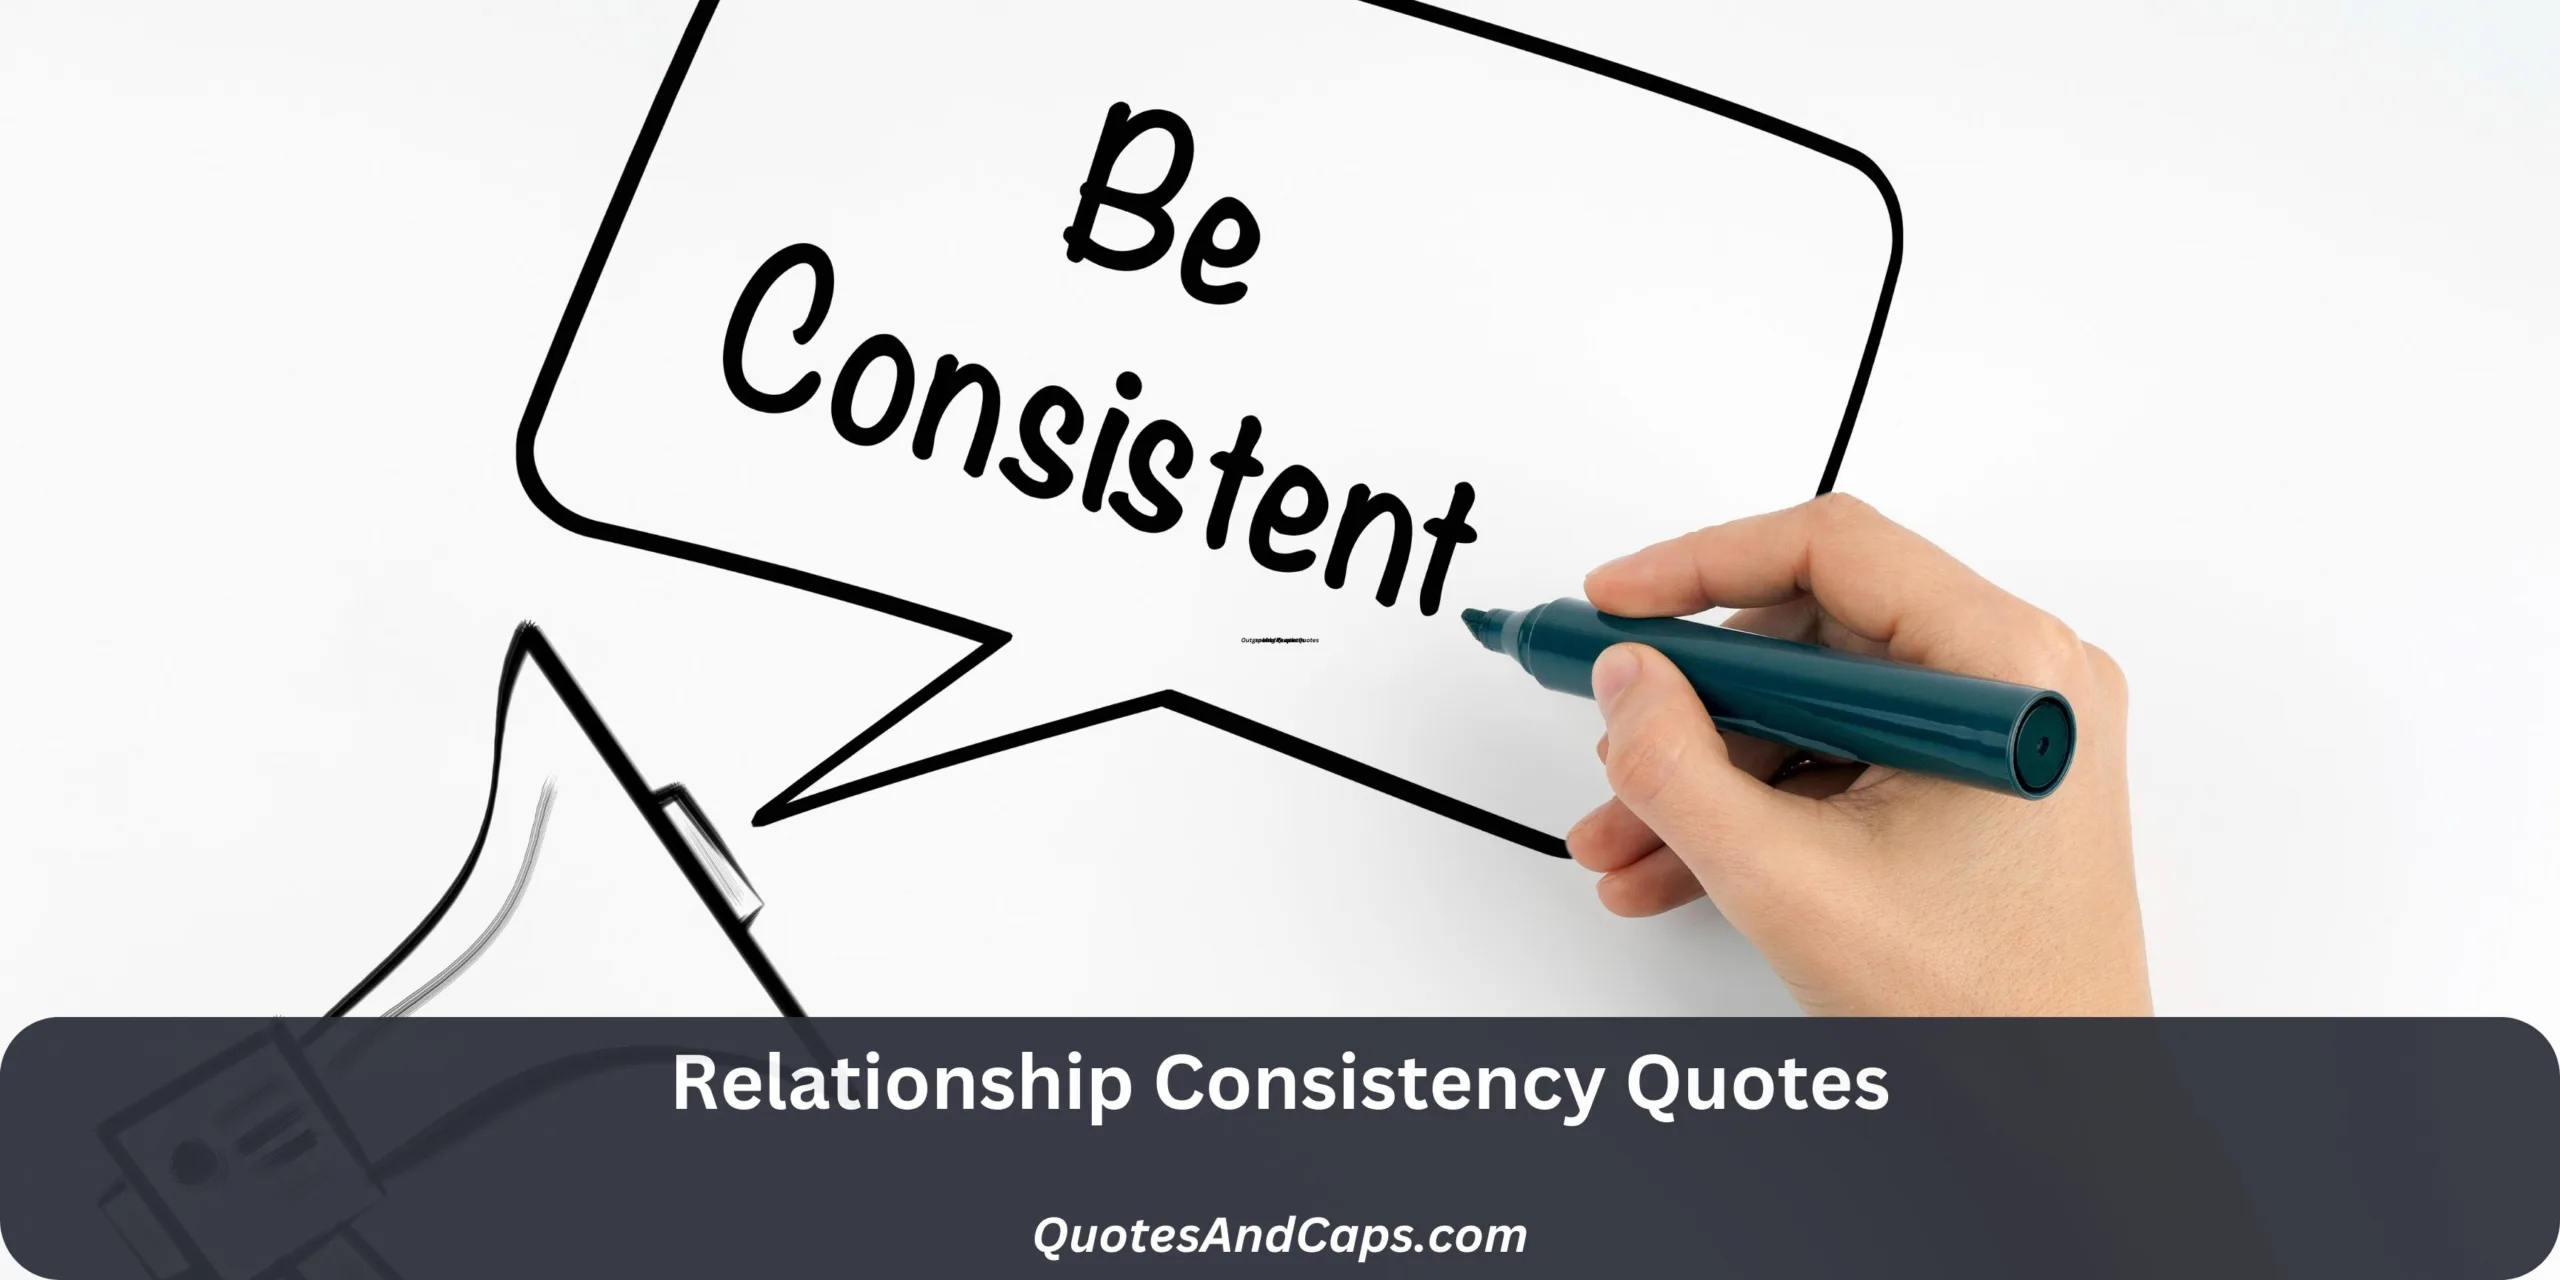 Relationship Consistency Quotes